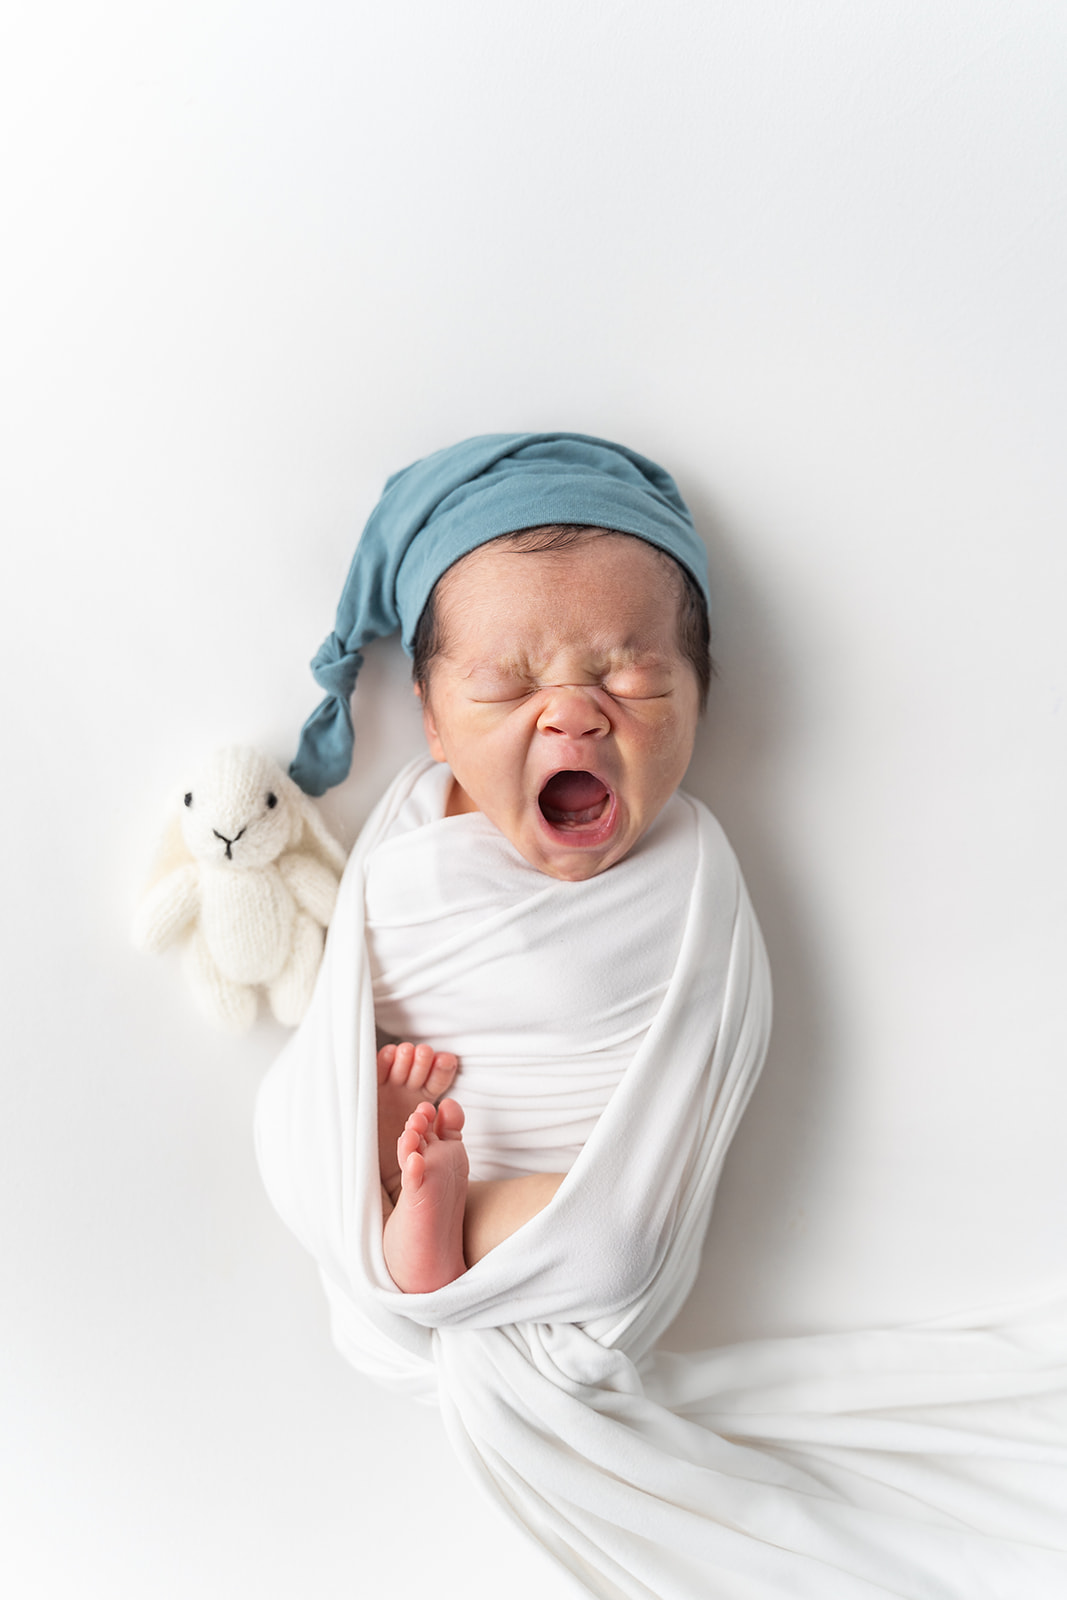 A newborn baby in a blue sleep cap yawns while laying on a bed in a studio